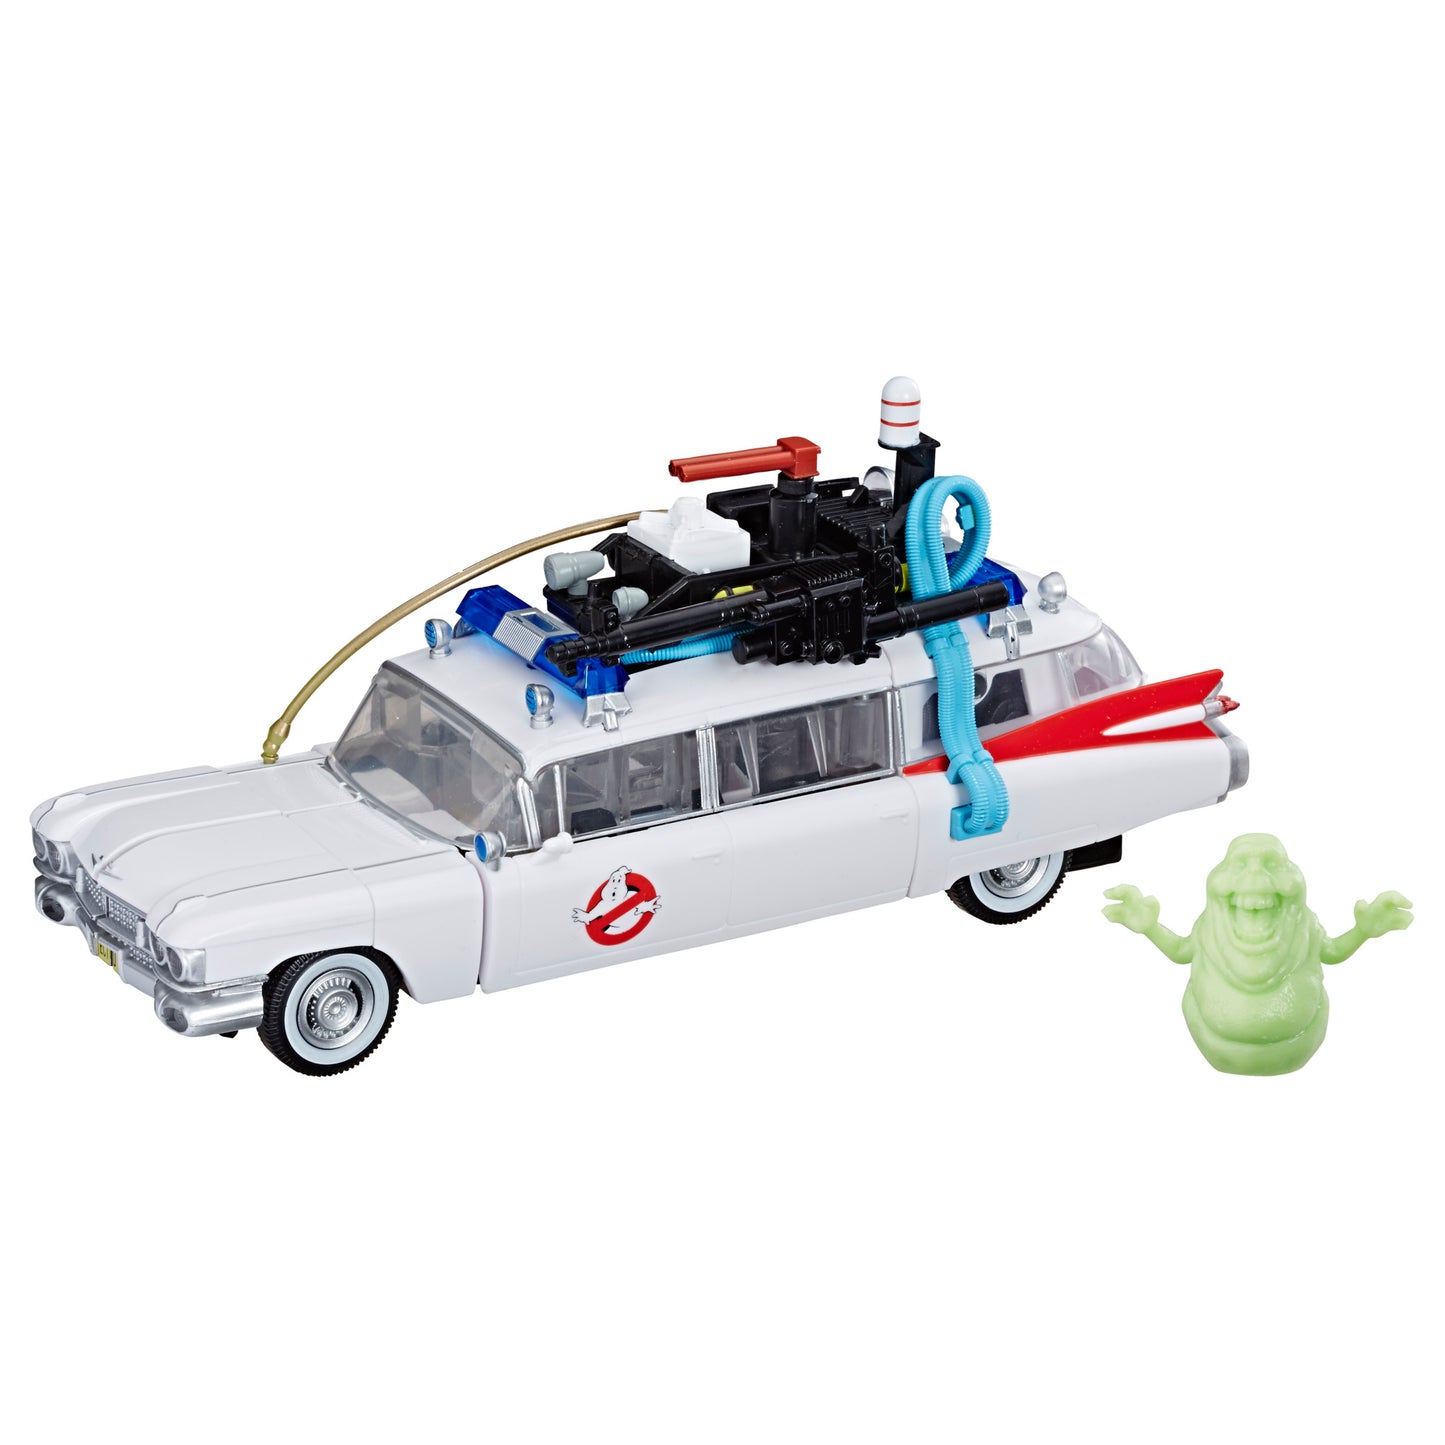 Transformers Collaborative Ghostbusters x Transformers Toy Ectotron, Transformers Action Figure, 8+